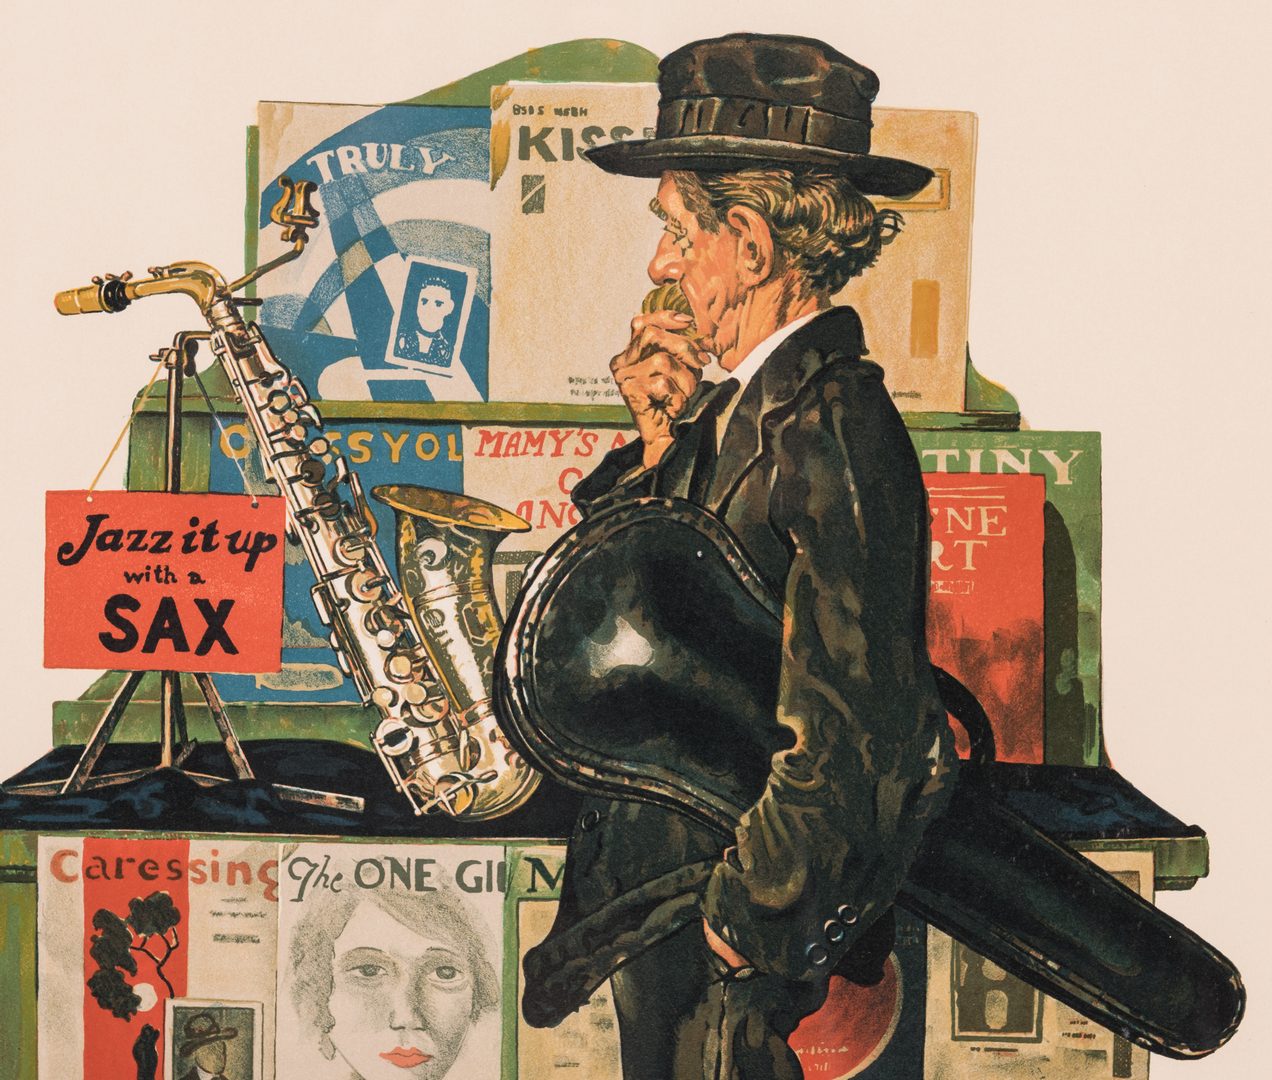 Lot 505: Norman Rockwell Lithograph, Jazz it Up